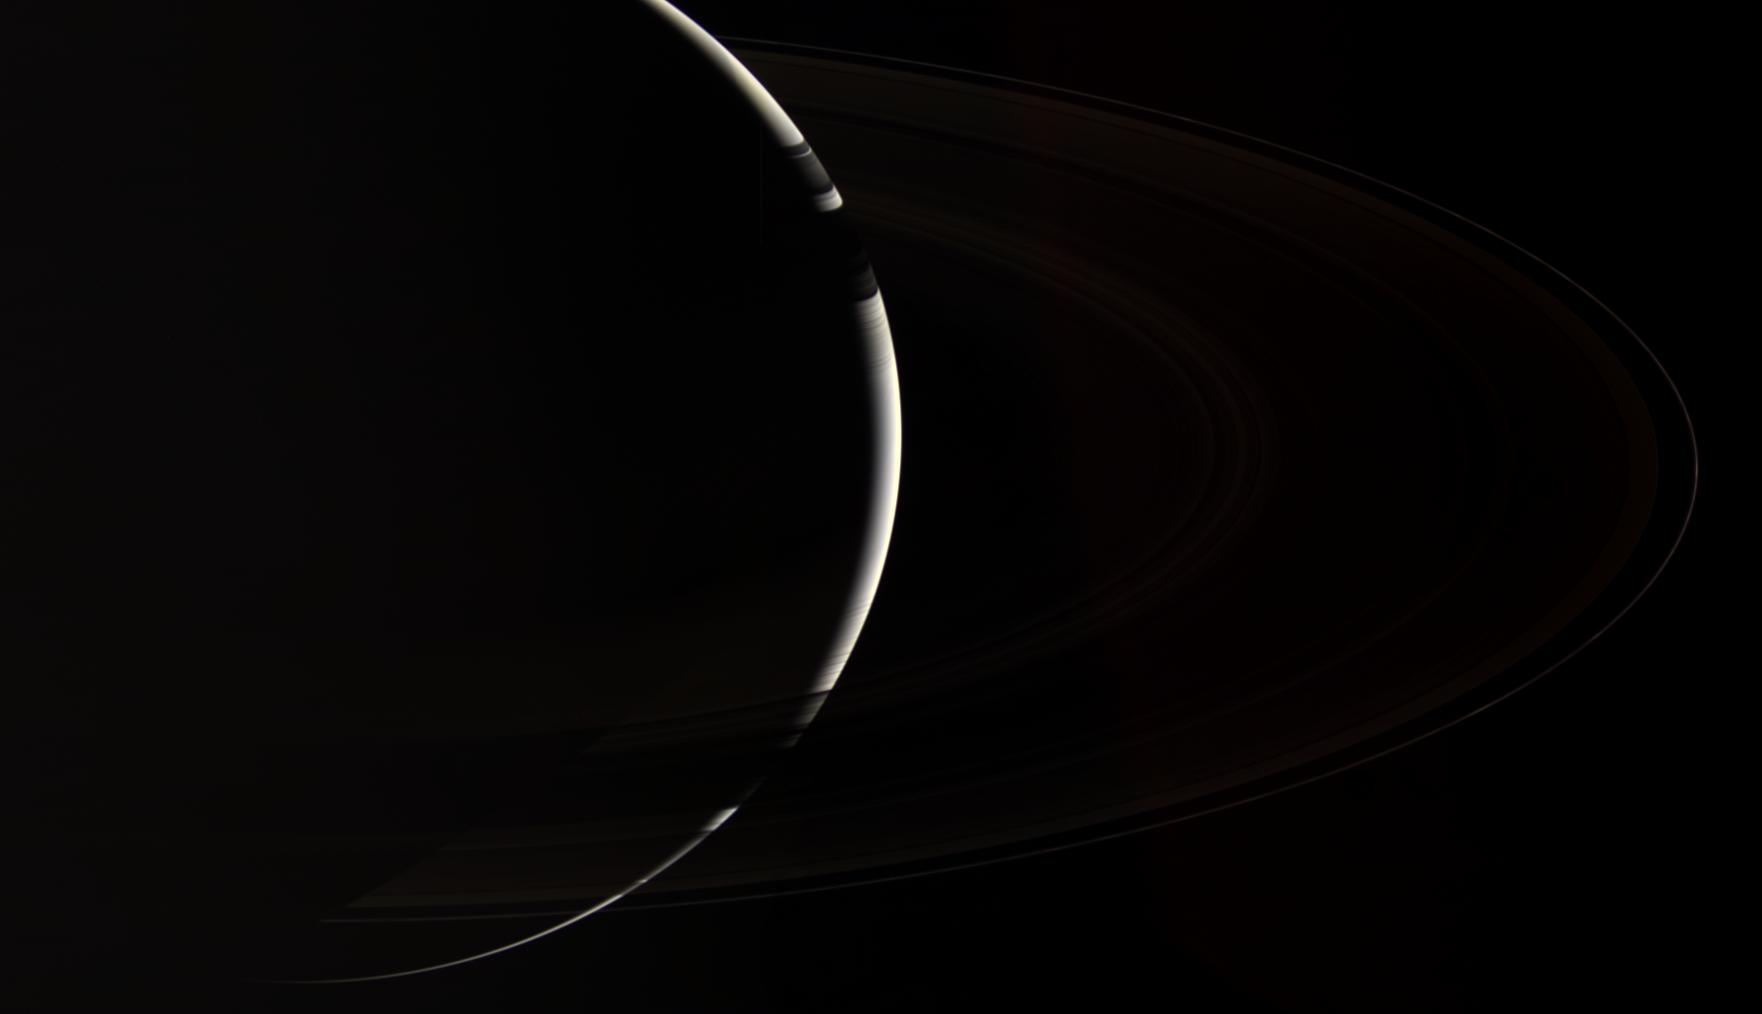 Only Cassini could provide this enchanting, natural color view of crescent Saturn, which gazes down onto the unlit side of the planet's spectacular rings. 